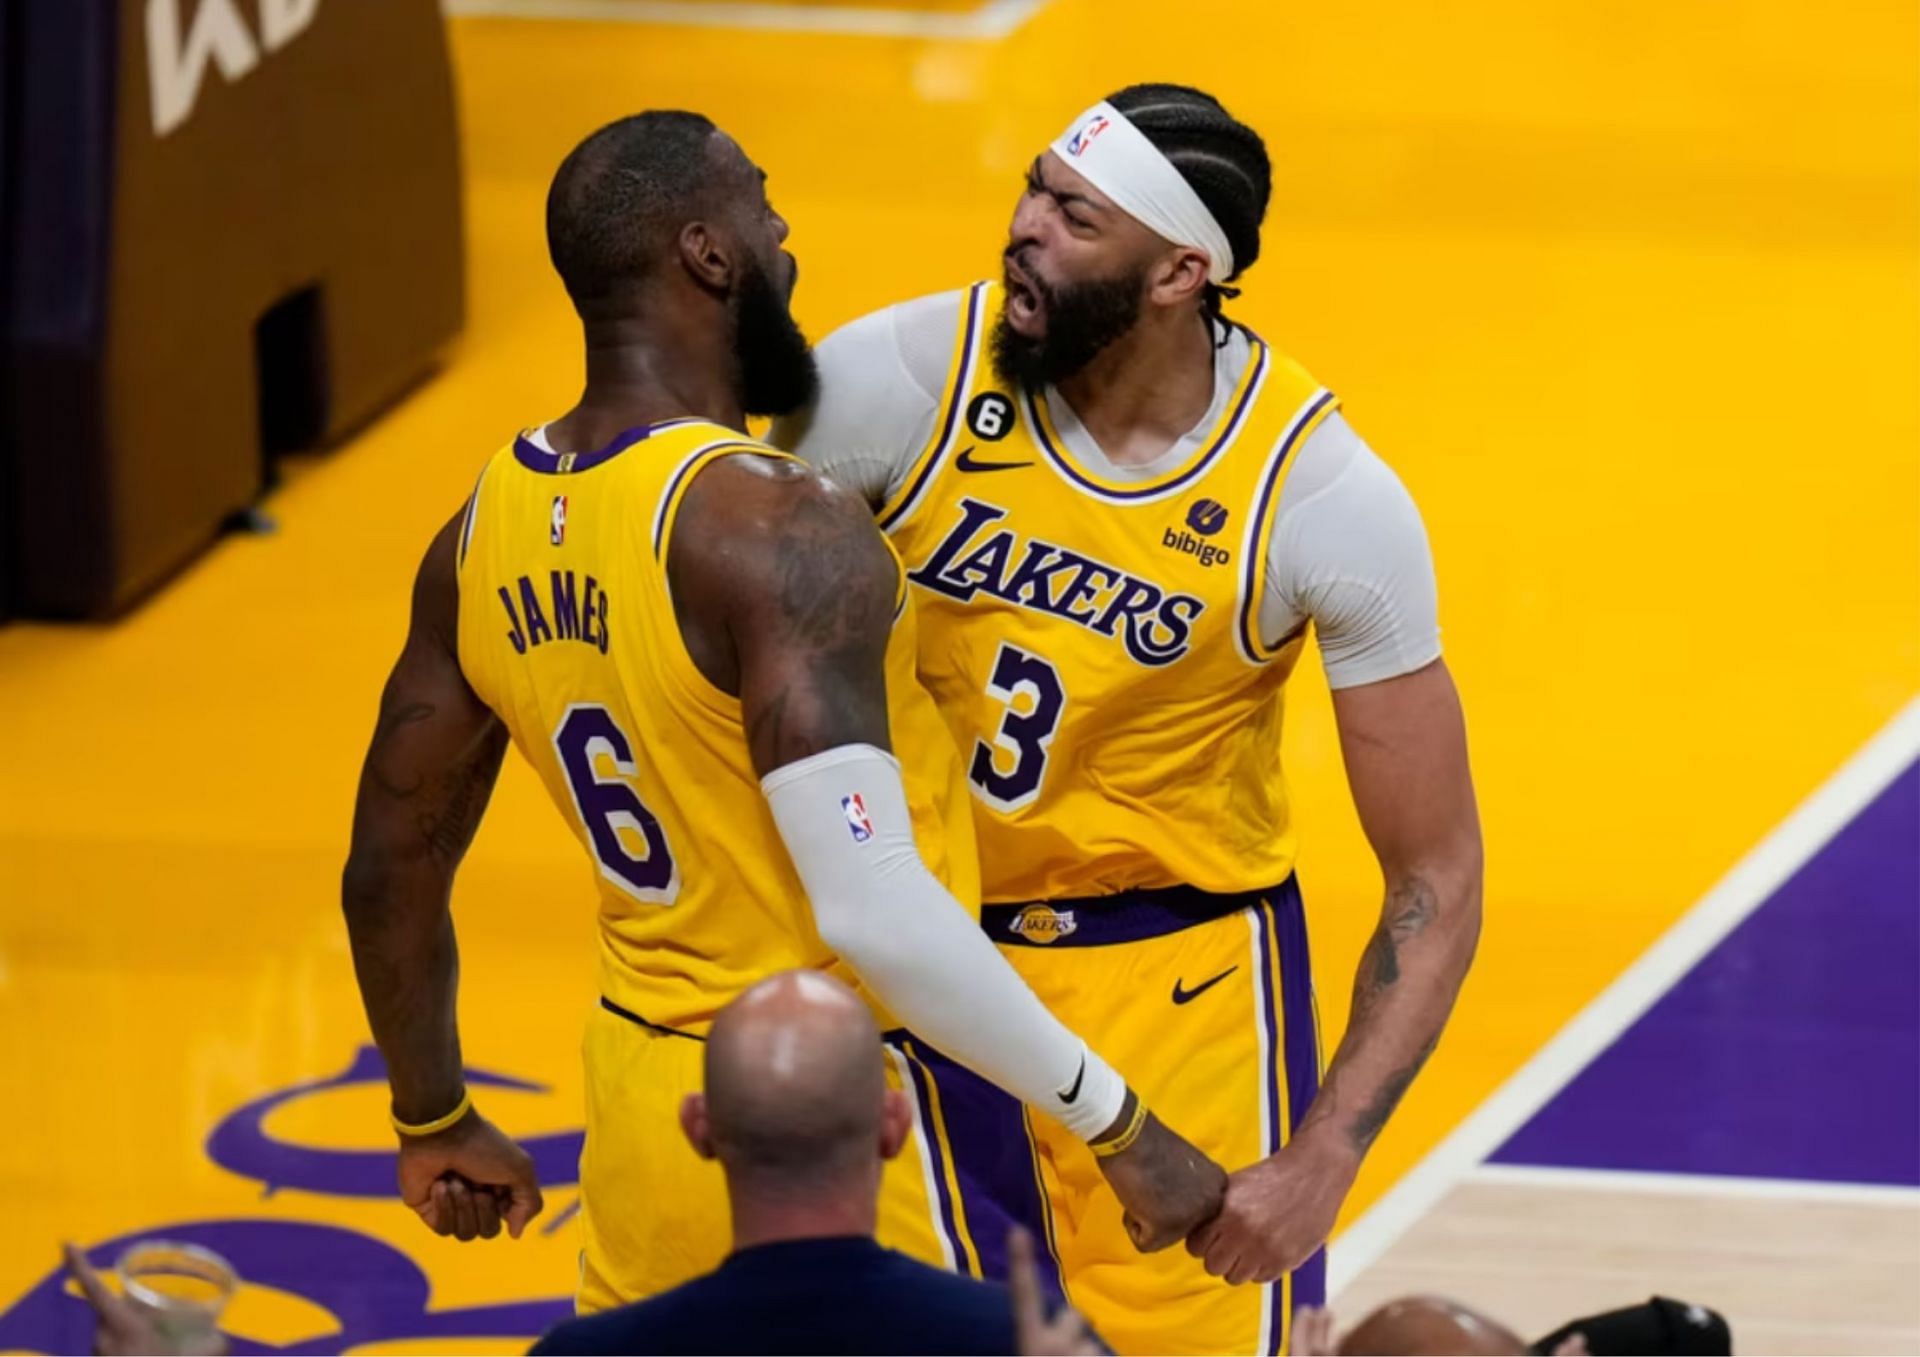 The LA Lakers will face the winners of the Golden State Warriors-Sacramento Kings series in the second round of the playoffs.